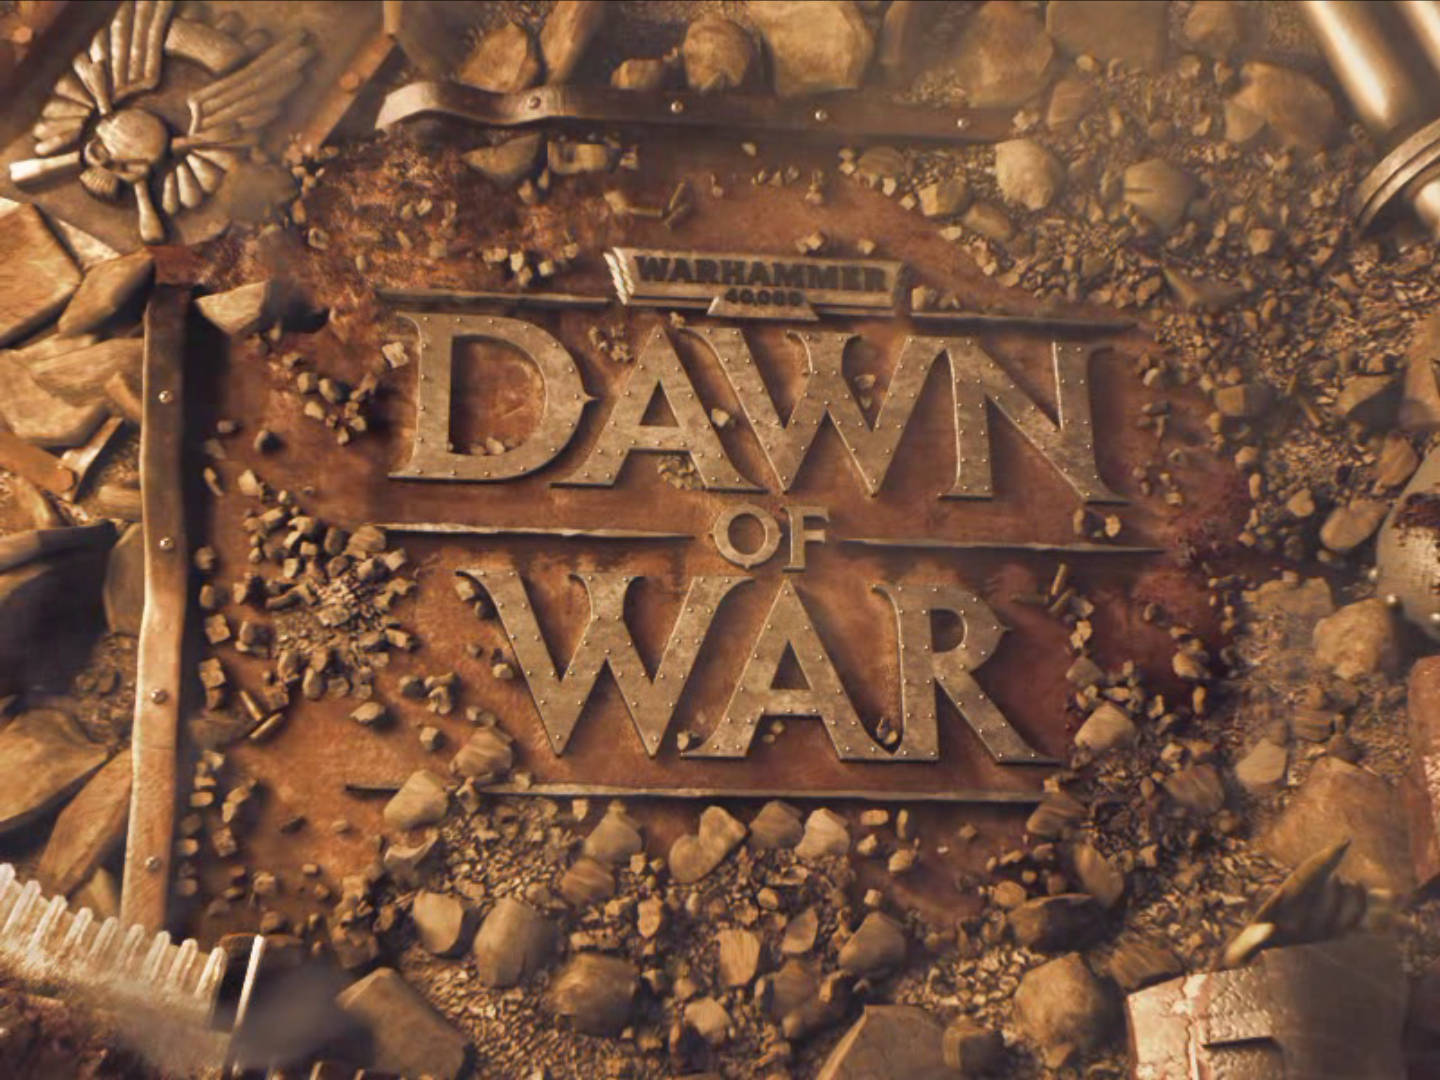 Dawn of War title from the intro video